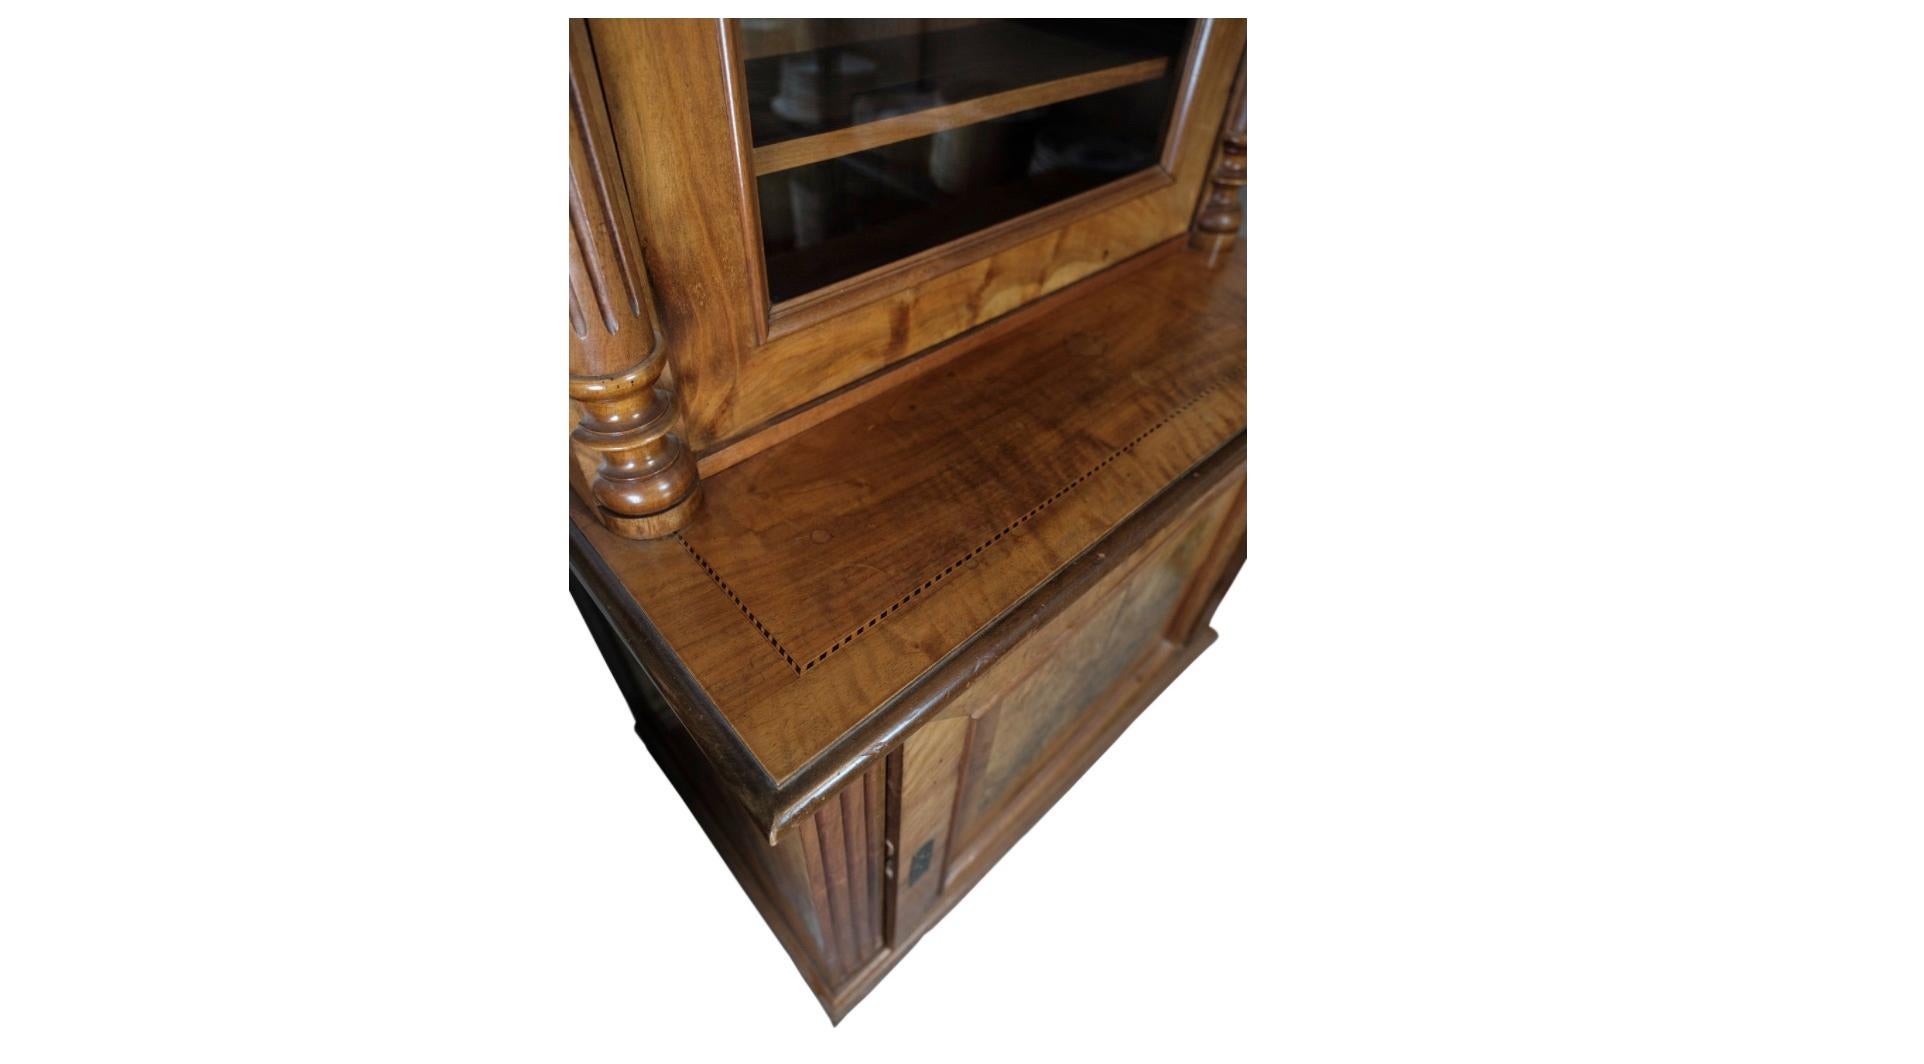 Late 19th Century Antique Display Cabinet in Mahogany from Around the 1880s